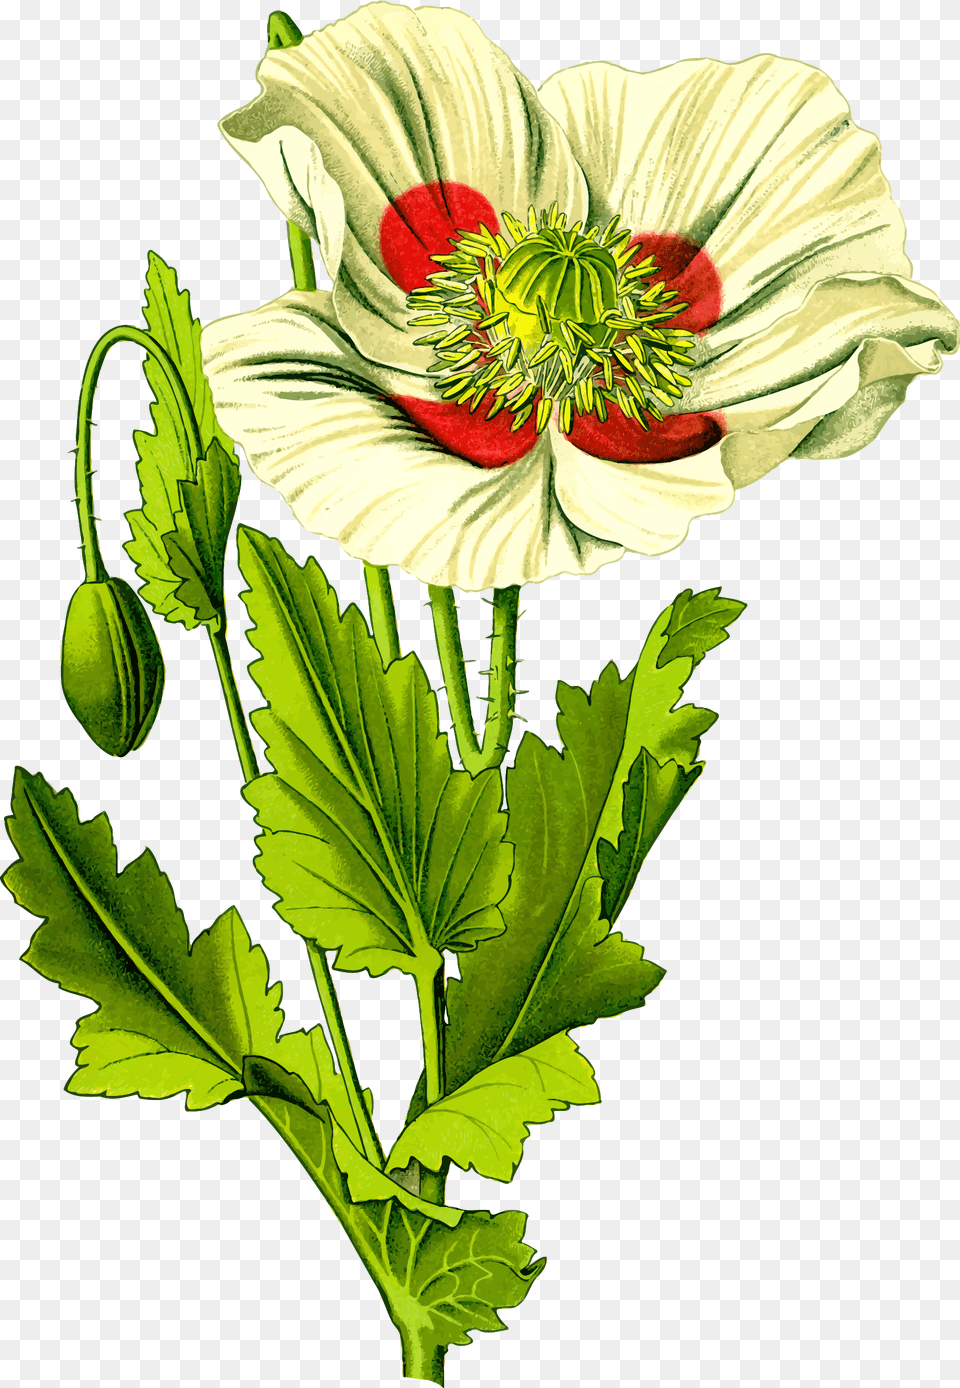 Opium Poppy 3 Clip Arts Opium Ancient Rome, Anther, Flower, Plant, Anemone Free Transparent Png